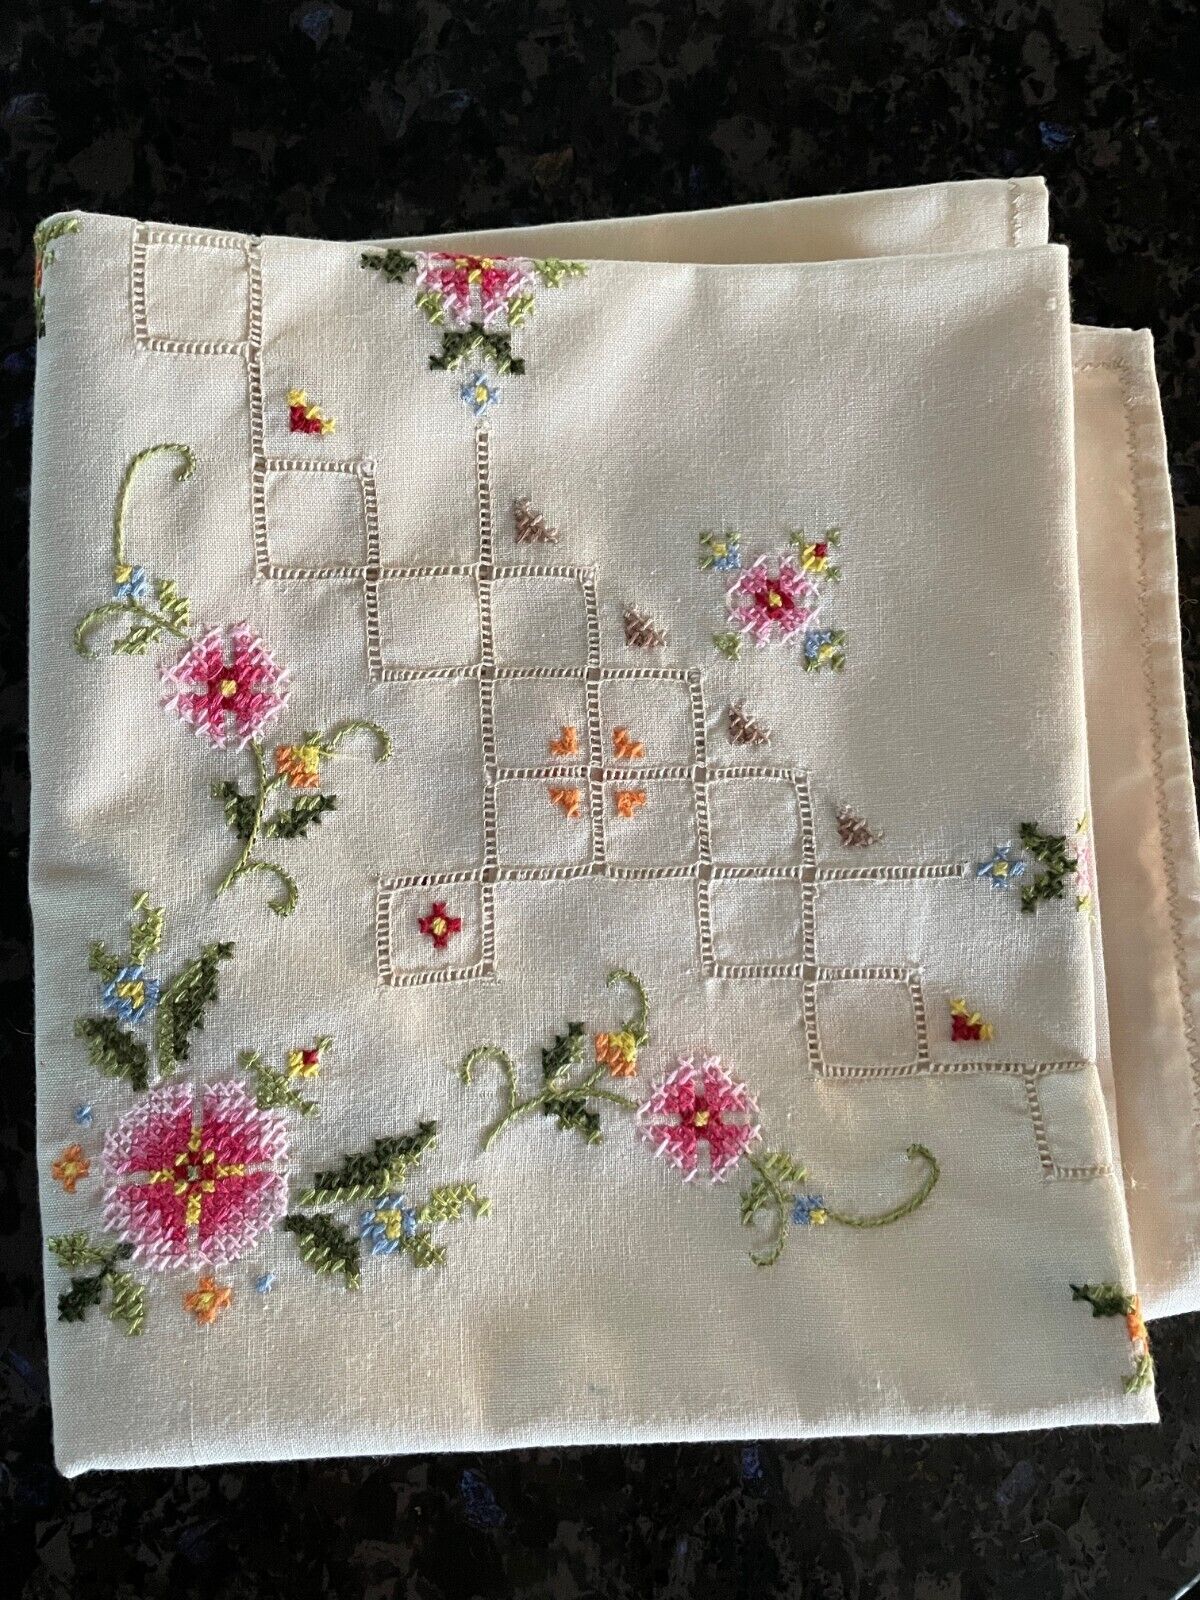 Floral Tablecloth Hand Embroidered Cross Stitch Needlepoint VTG tablecloth 32x33